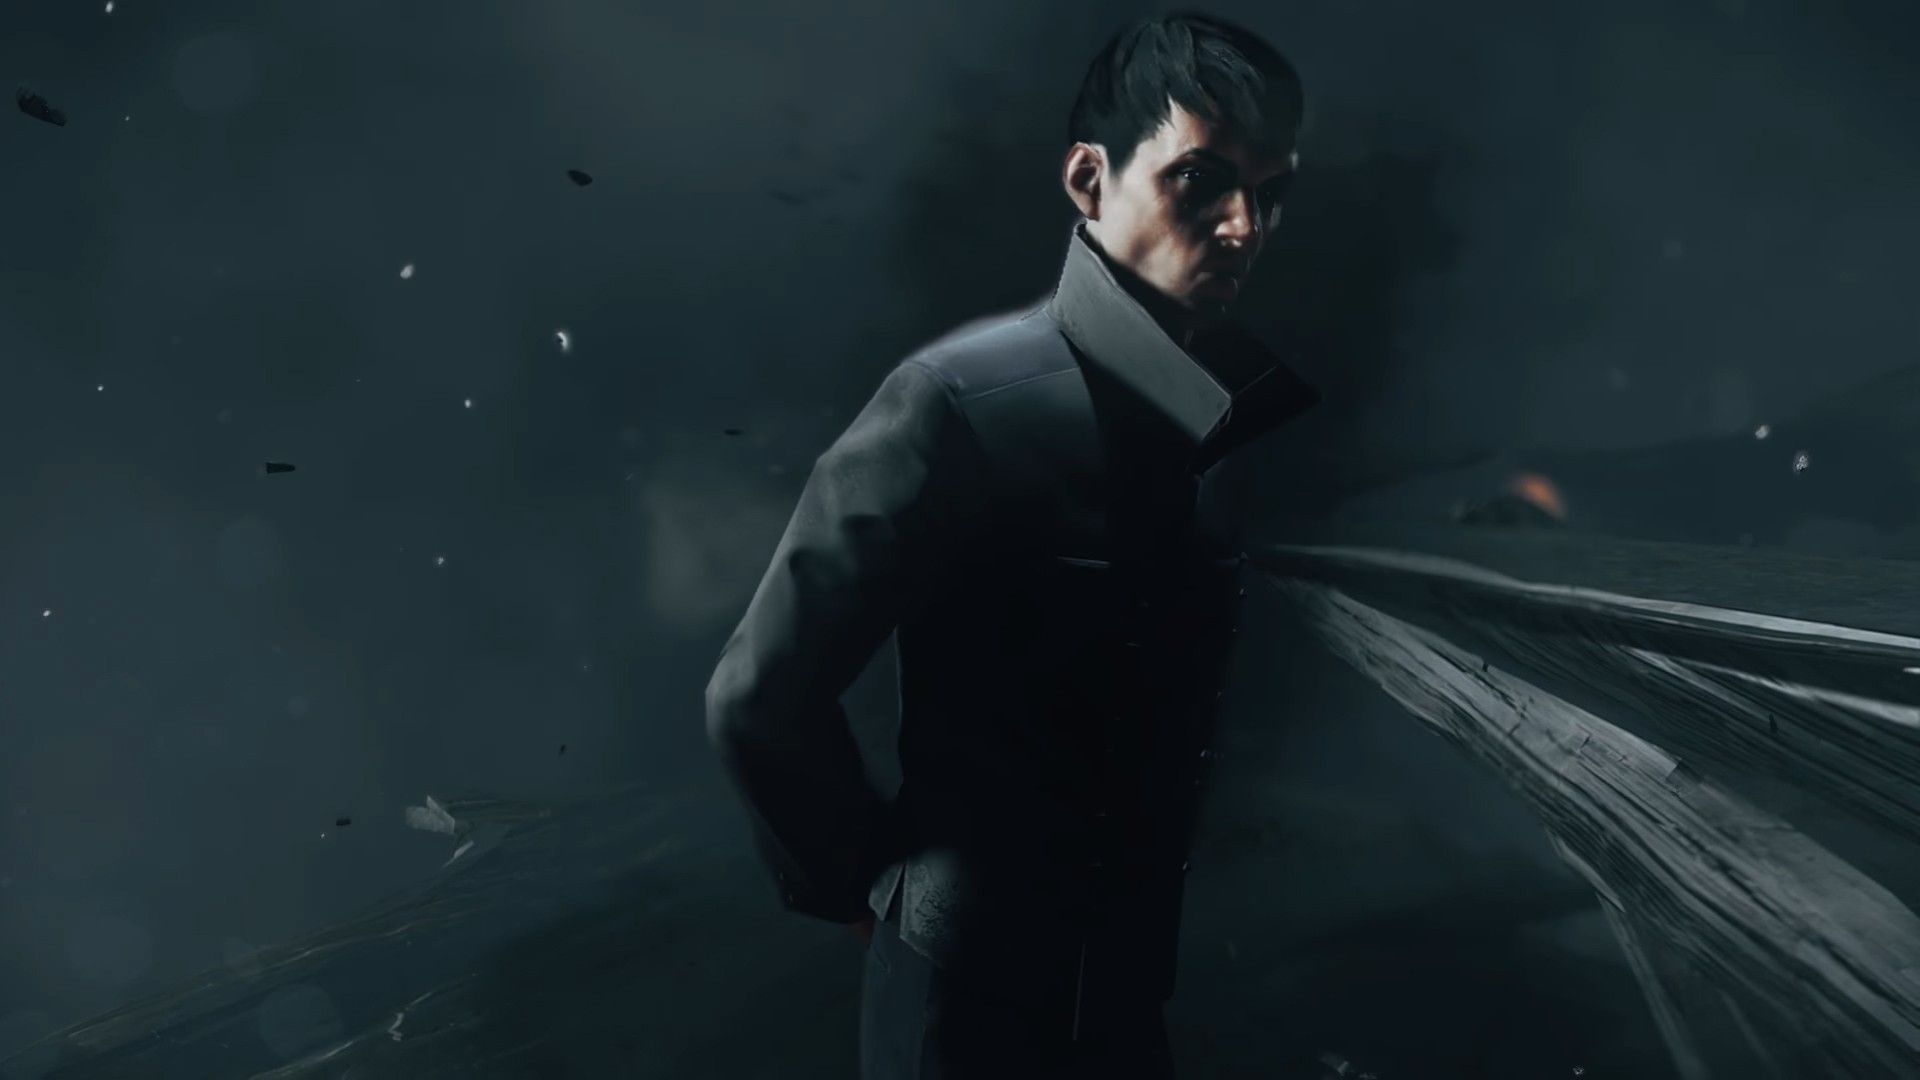 download dishonored 2 free